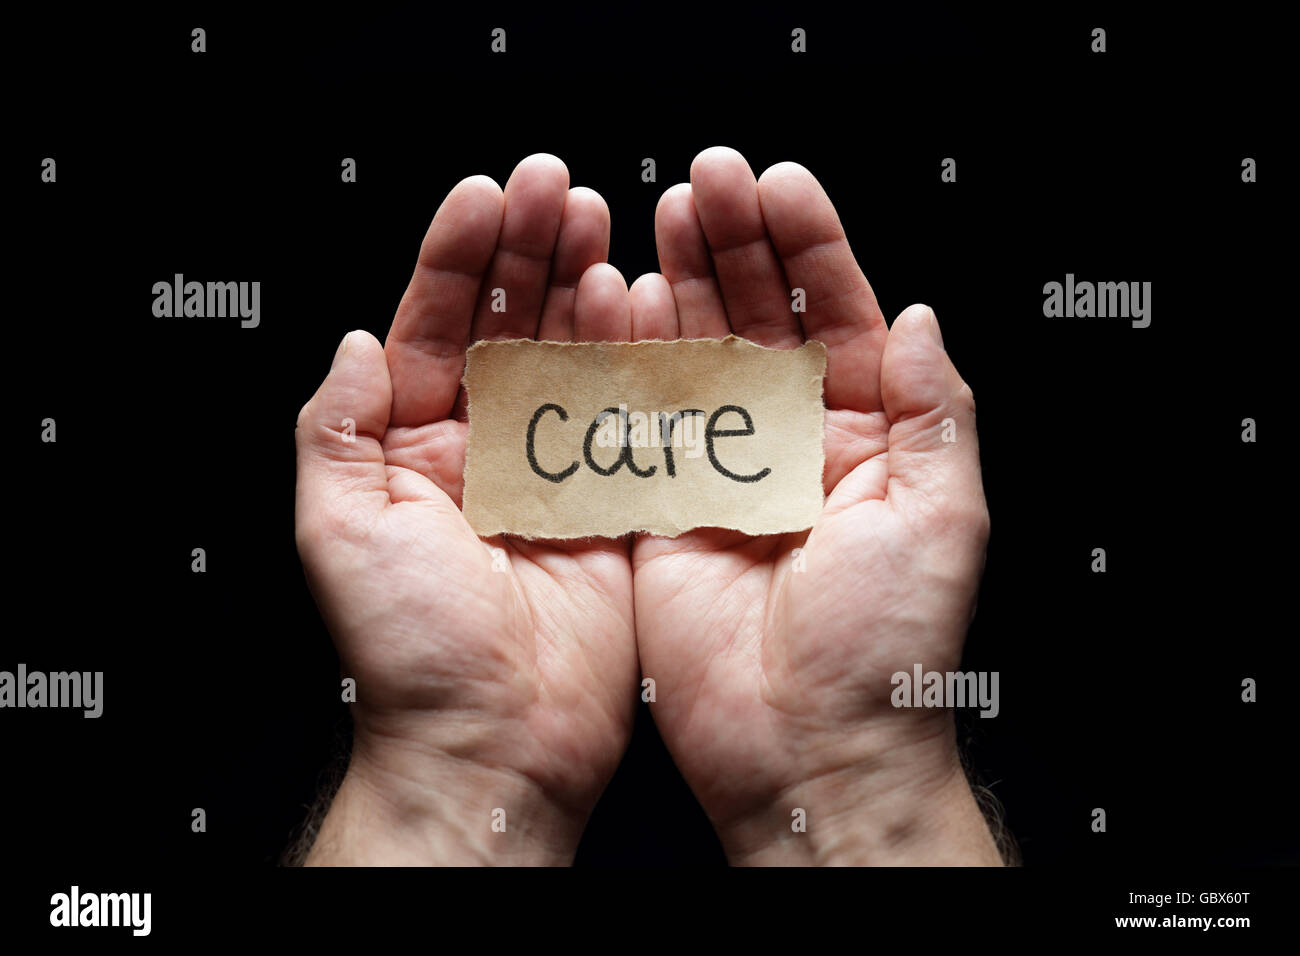 Care with the protection of cupped hands, concept for love, help, assistance, security and caring Stock Photo